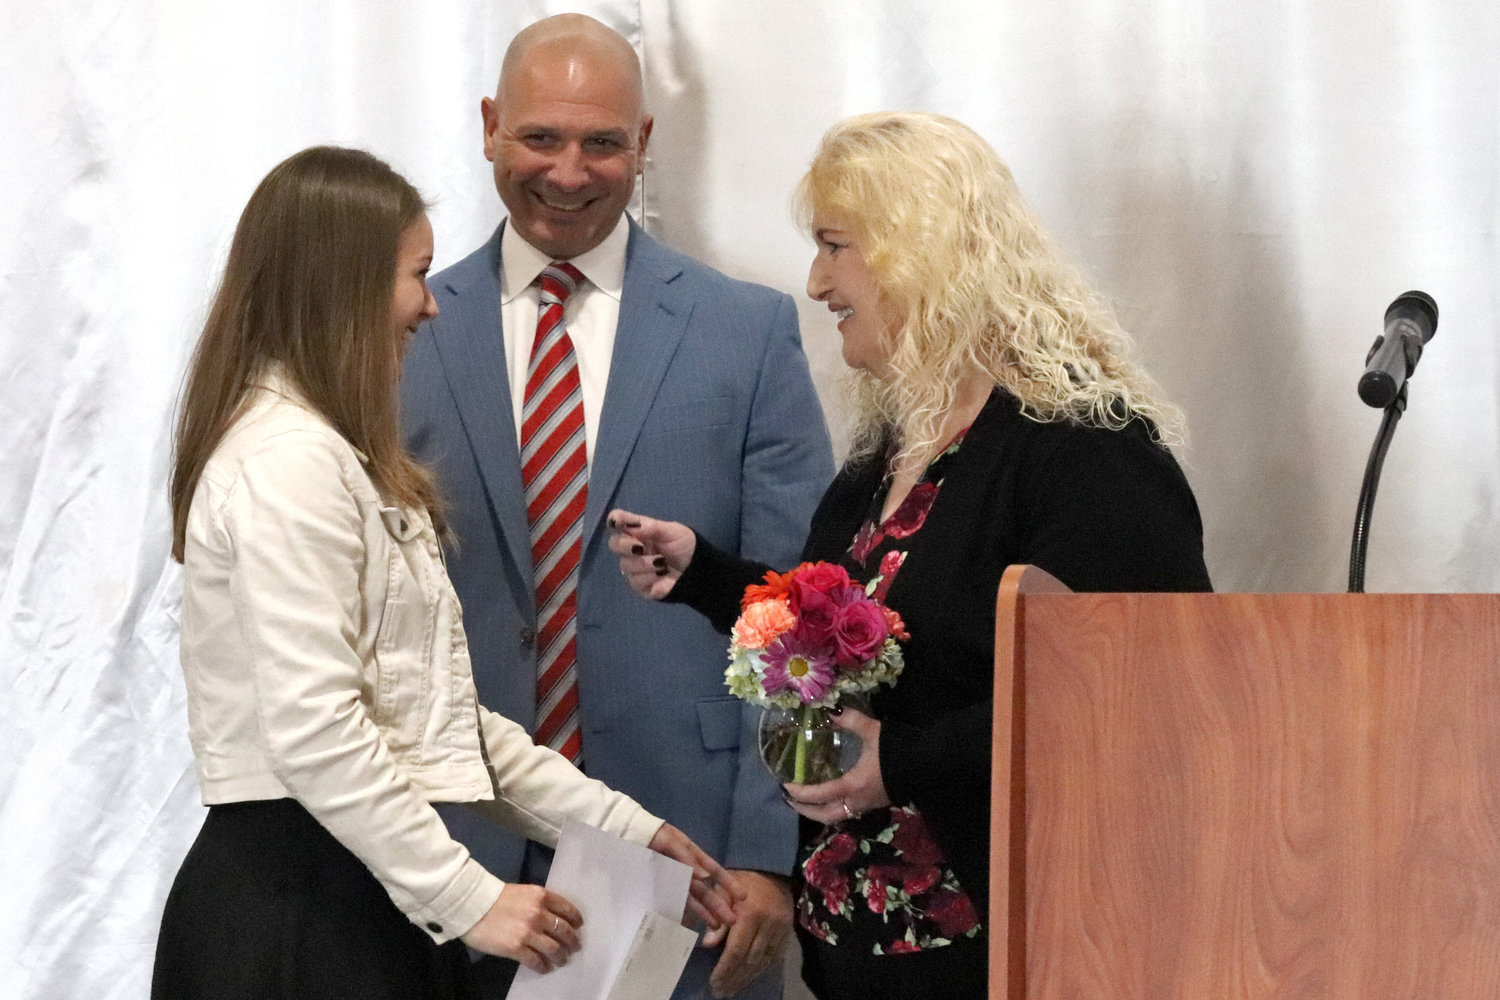 Debra Collinsworth and Rep. Peter Abbarno present the Cheyllyn Collinsworth Scholarship to Centralia senior Evie Rooklidge during the Rob Fuller Top 25 Scholarship Luncheon in Chehalis on Monday.